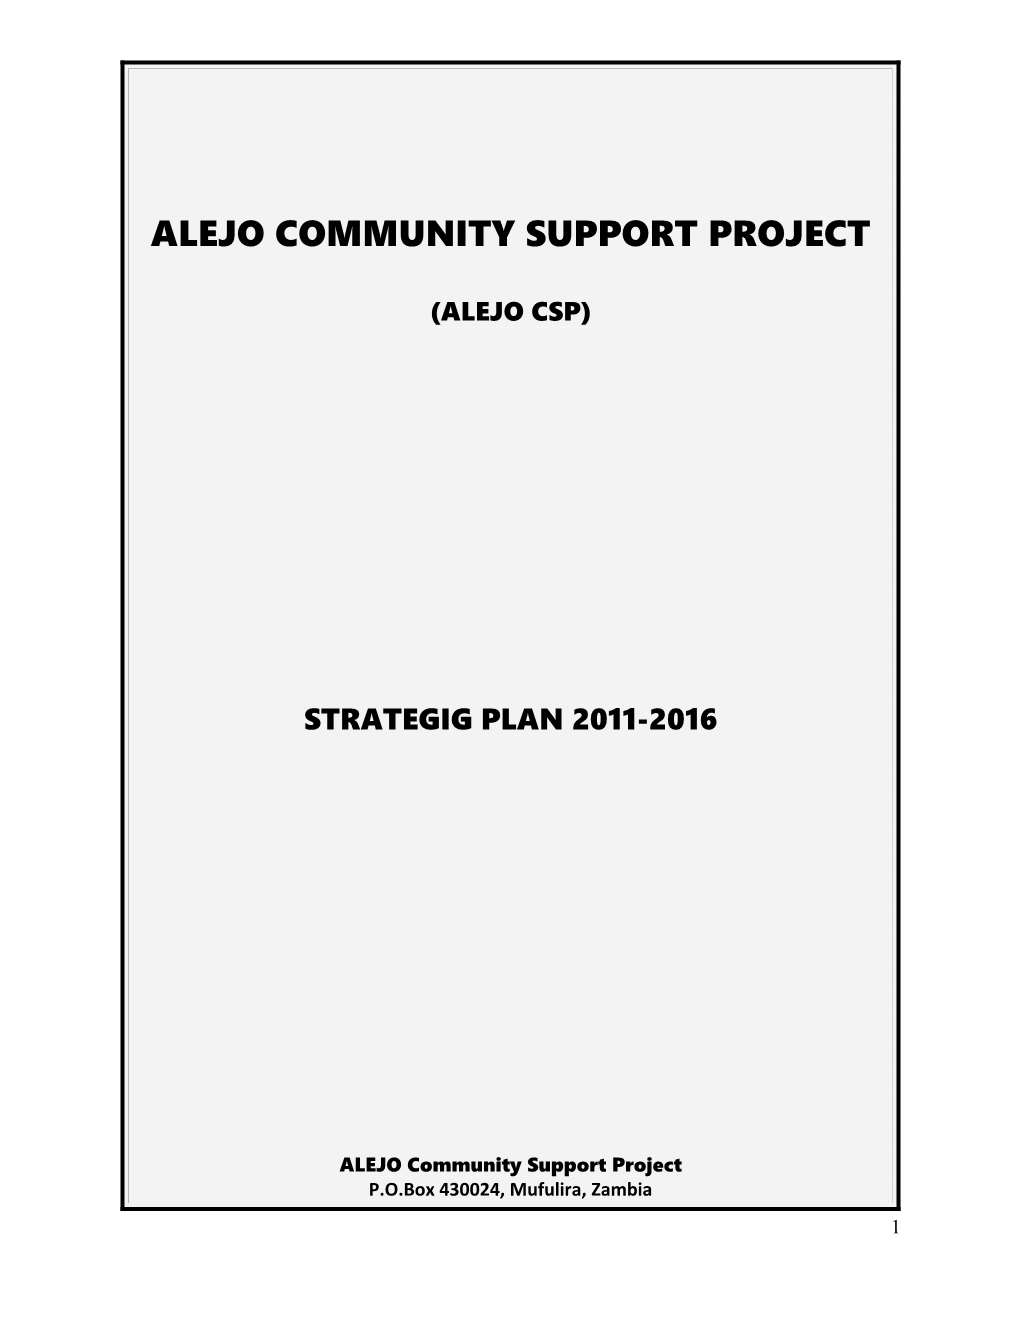 Alejo Community Support Project